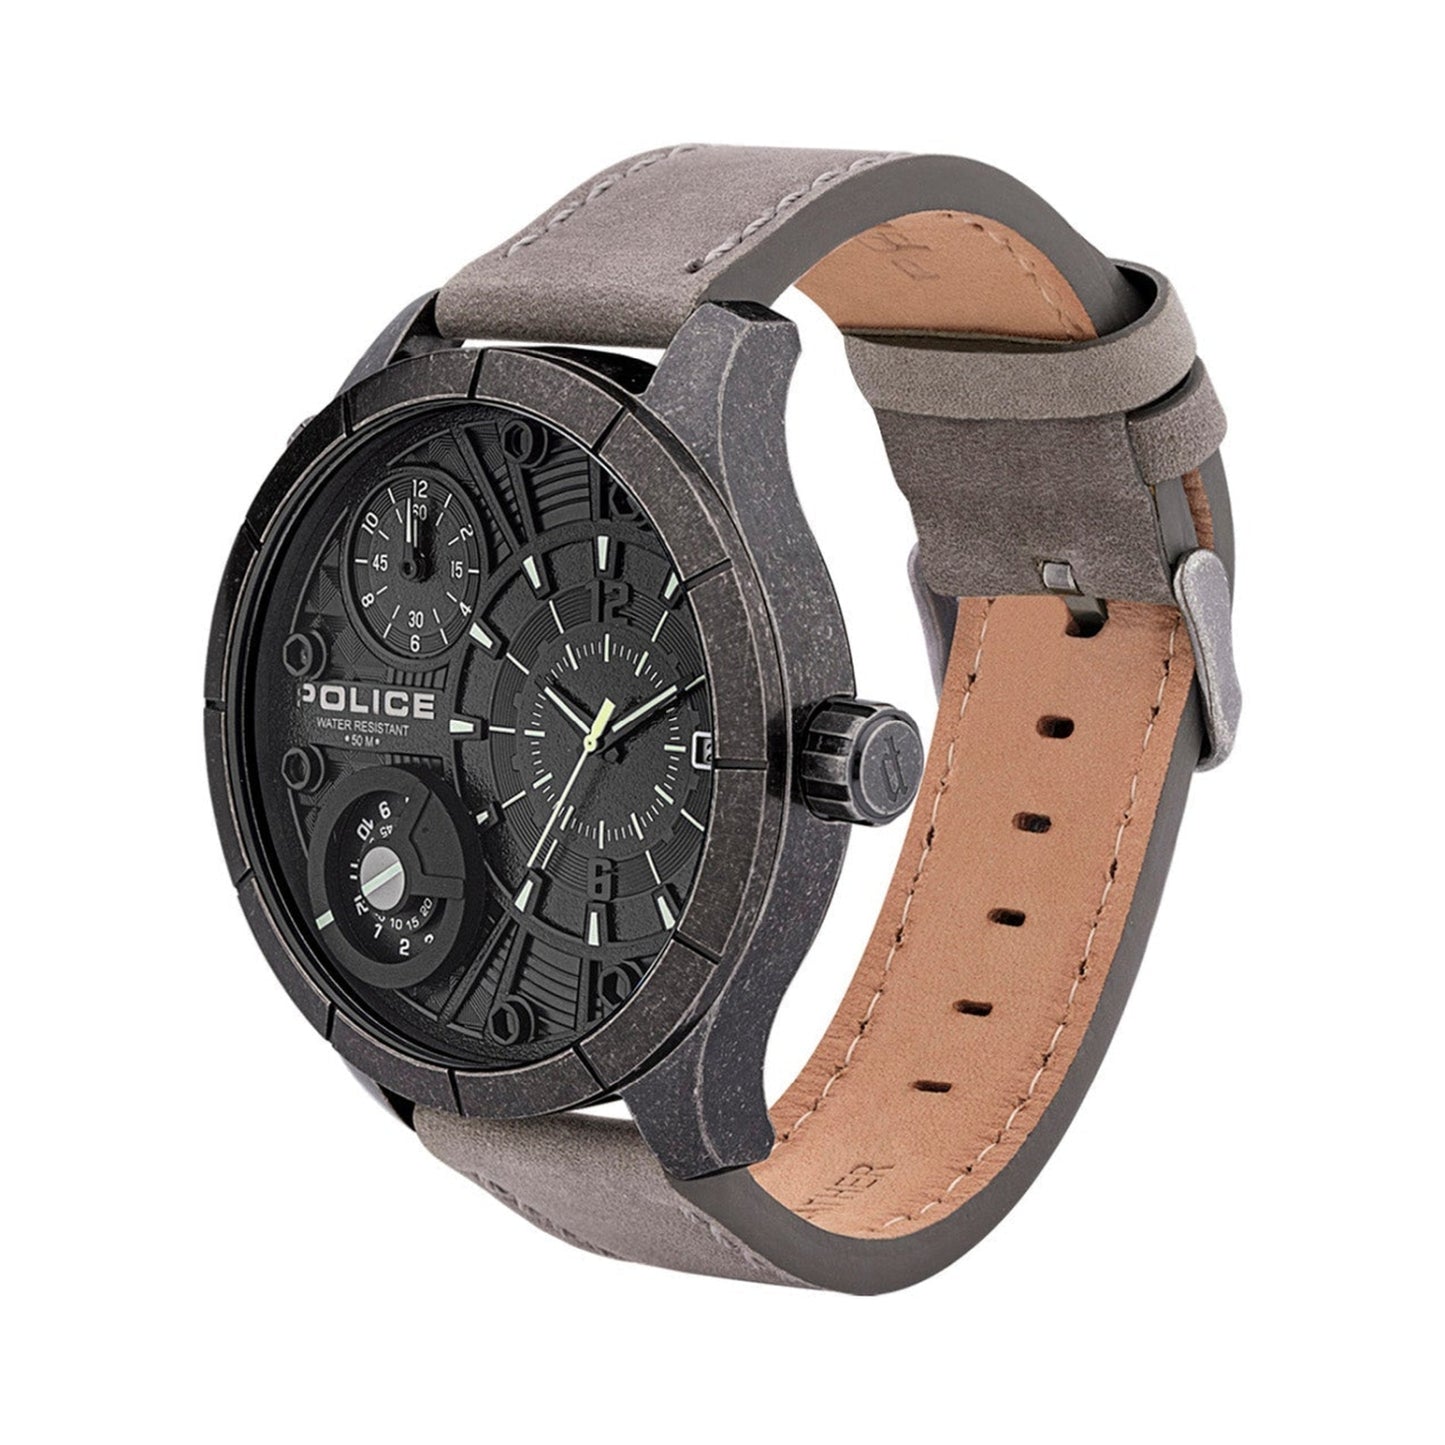 Police Bushmaster Black and Brown Gents Watch